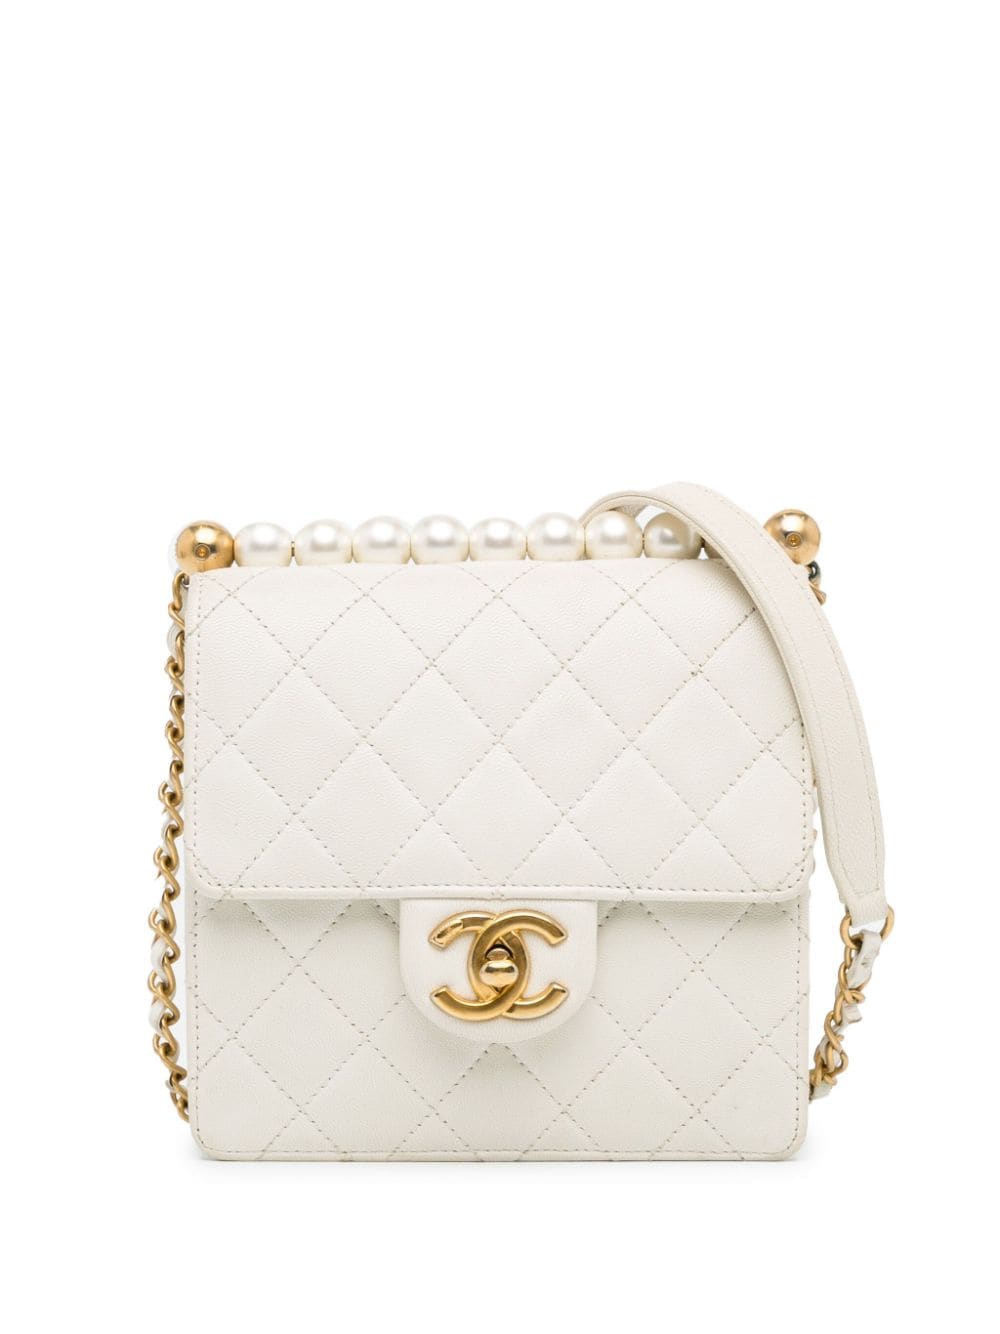 Pre-owned Chanel 2019 Small Lambskin Chic Pearls Flap Crossbody Bag In White